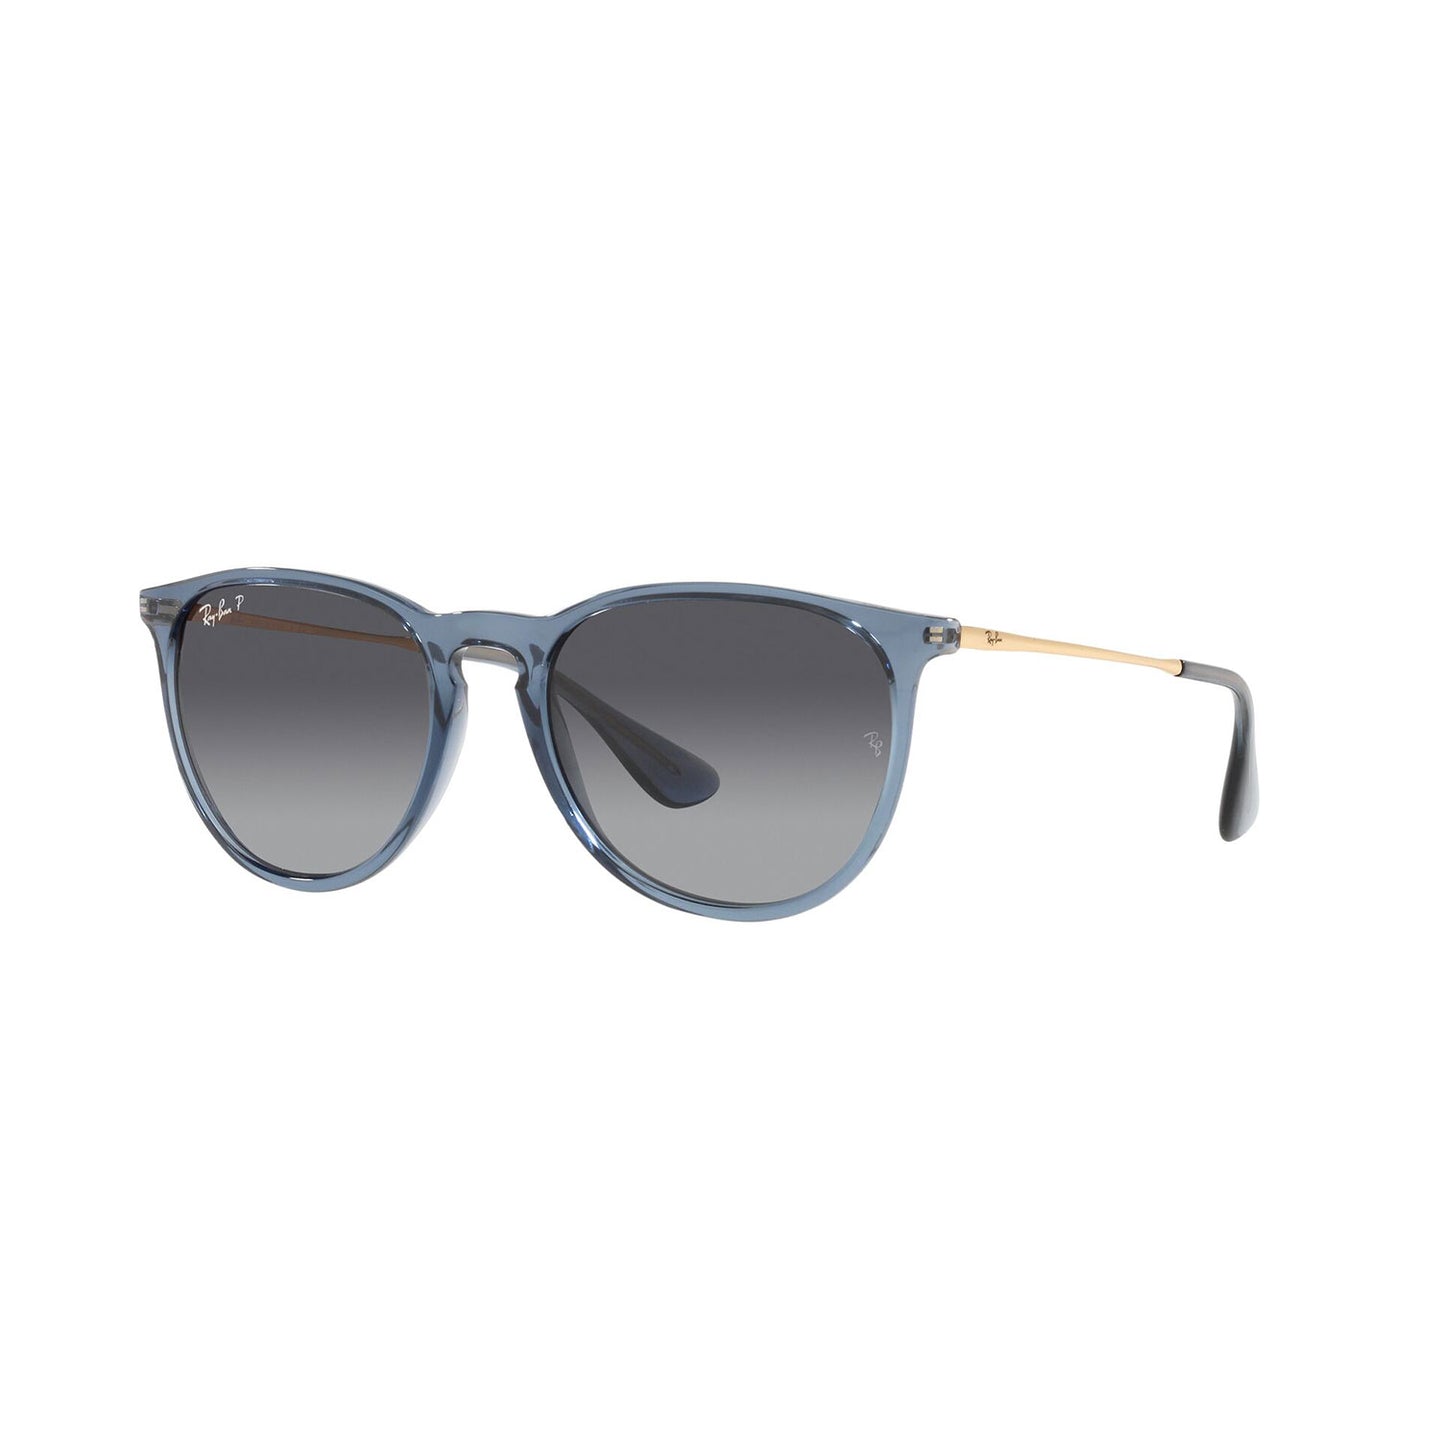 sunglasses ray ban rb 4171 color 6592/Τ3 